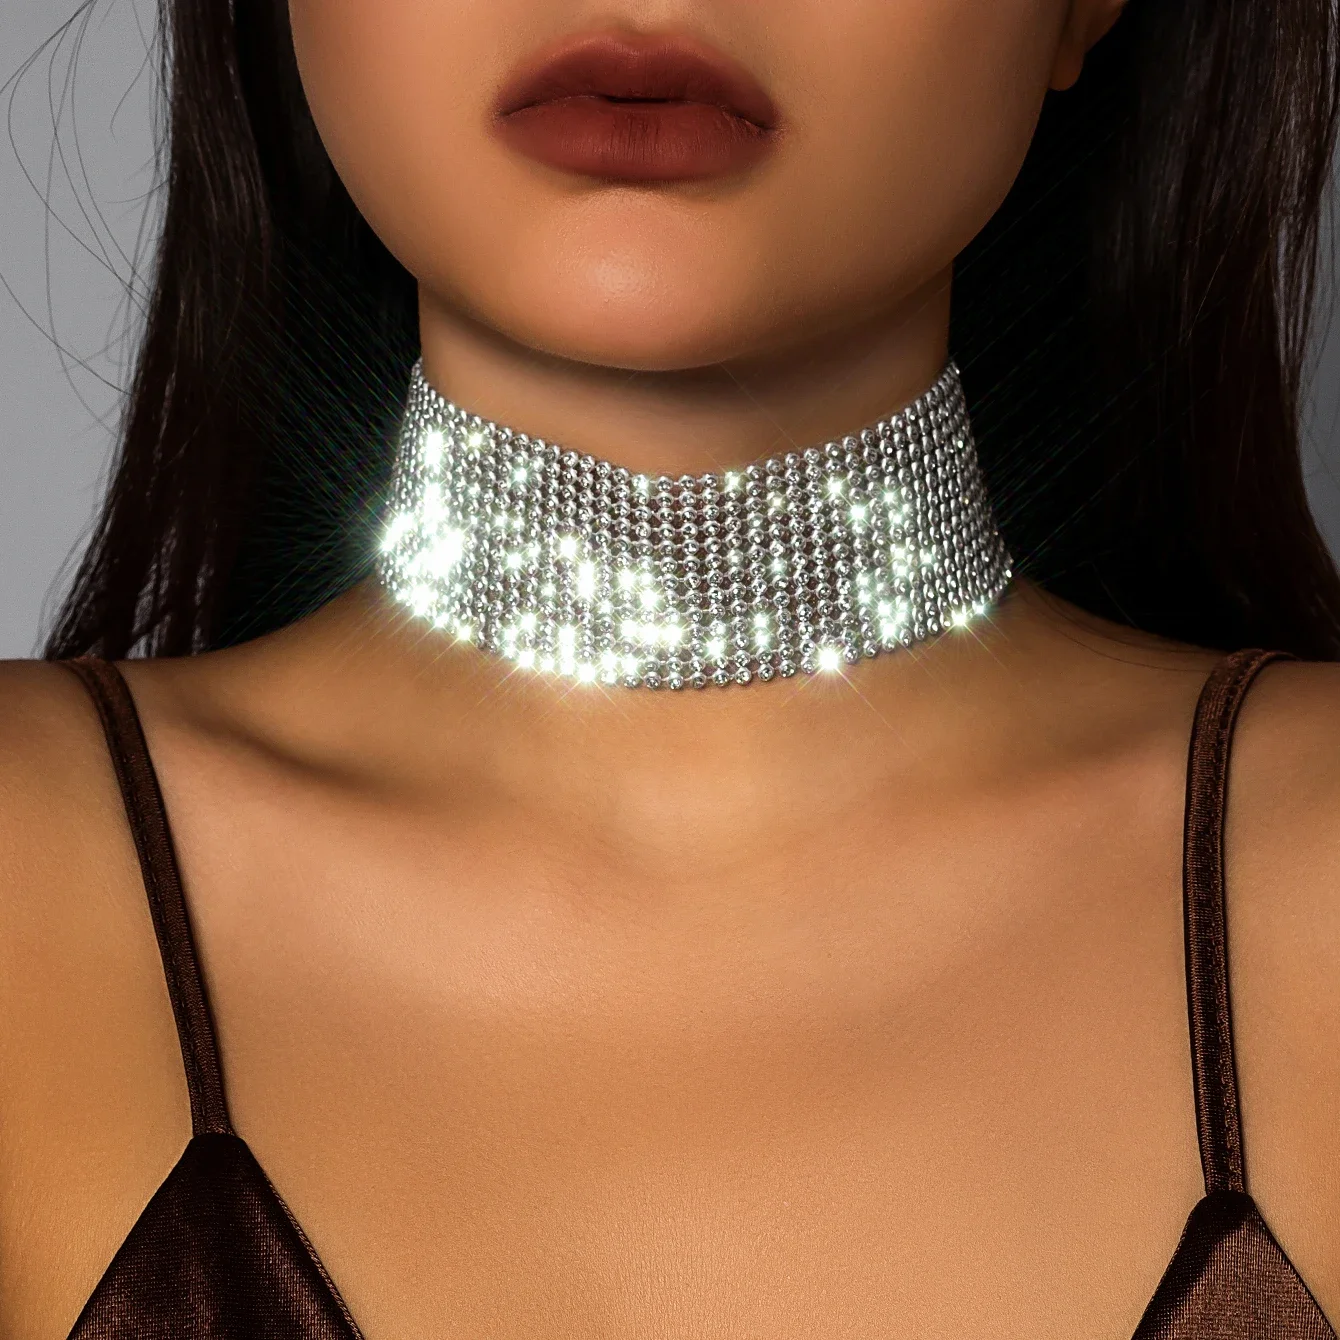 

Sparkling Silver Color Crystal Collar Choker Necklace for Women Bridal Goth Rhinestone Clavicle Chain Elegant Jewelry